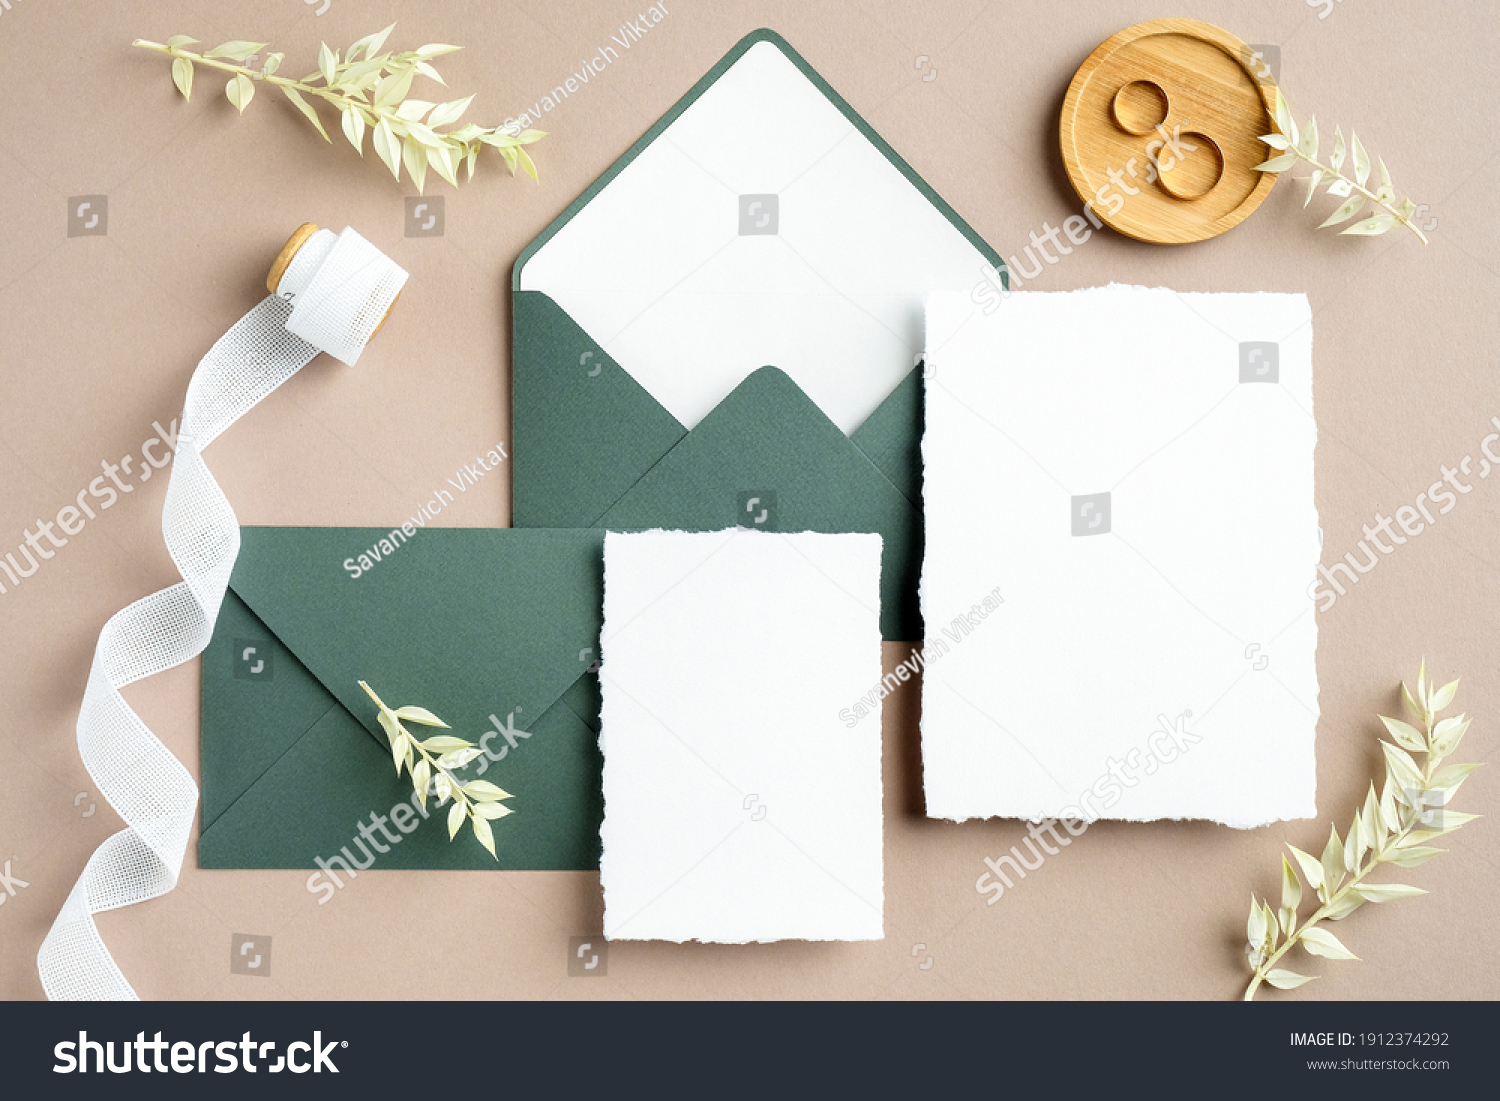 Elegant wedding stationery set. Wedding invitation cards templates, green envelopes, silk ribbon, golden rings on pastel beige background. Flat lay, top view, copy space. #1912374292